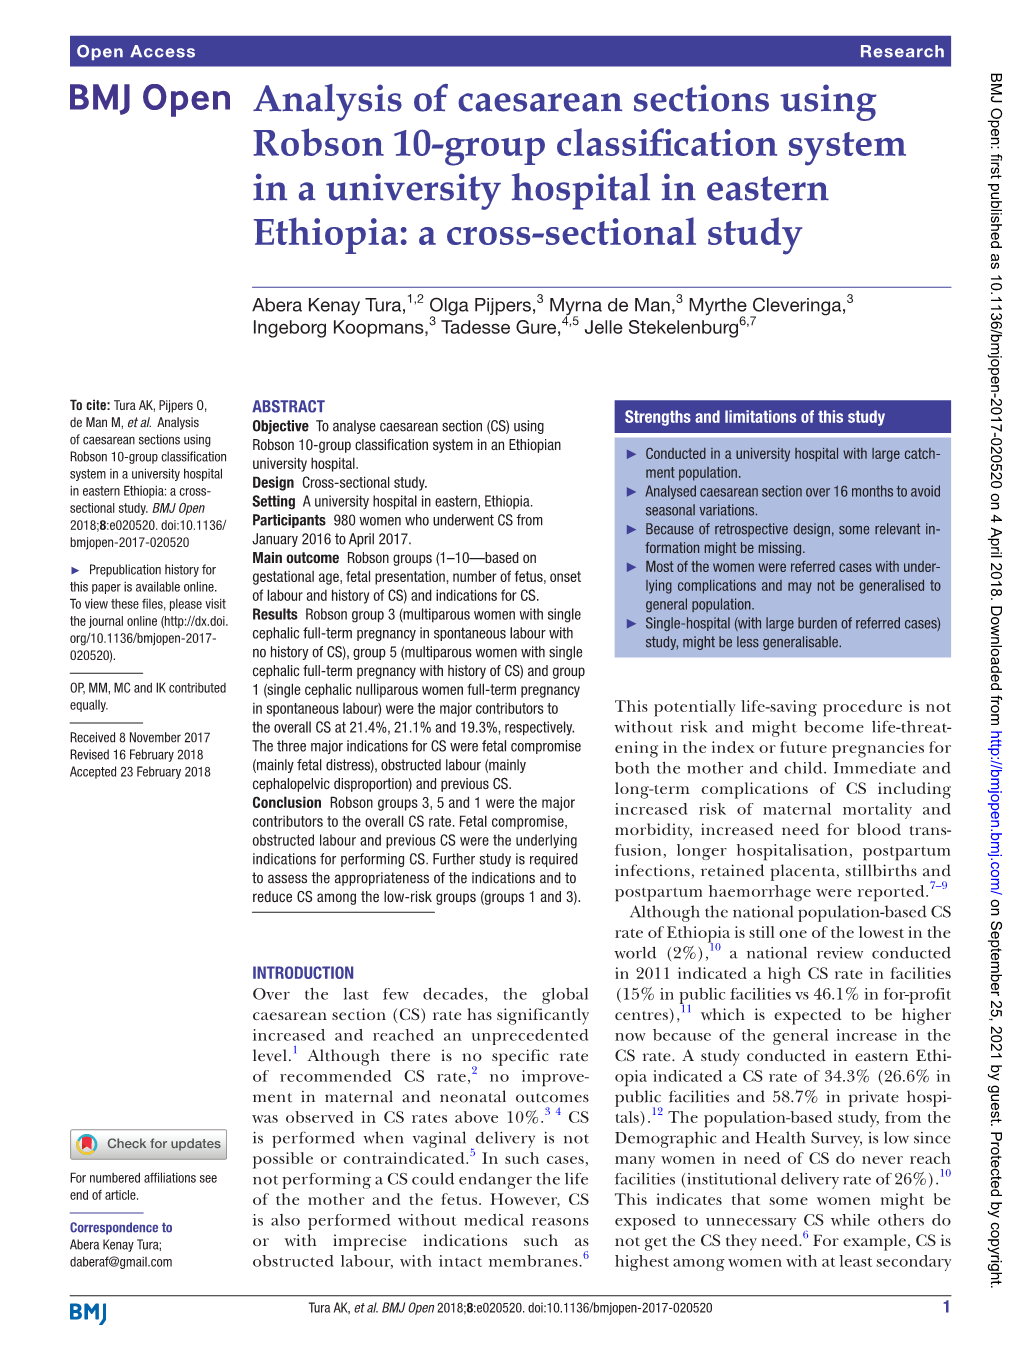 Analysis of Caesarean Sections Using Robson 10-Group Classification System in a University Hospital in Eastern Ethiopia: a Cross-Sectional Study